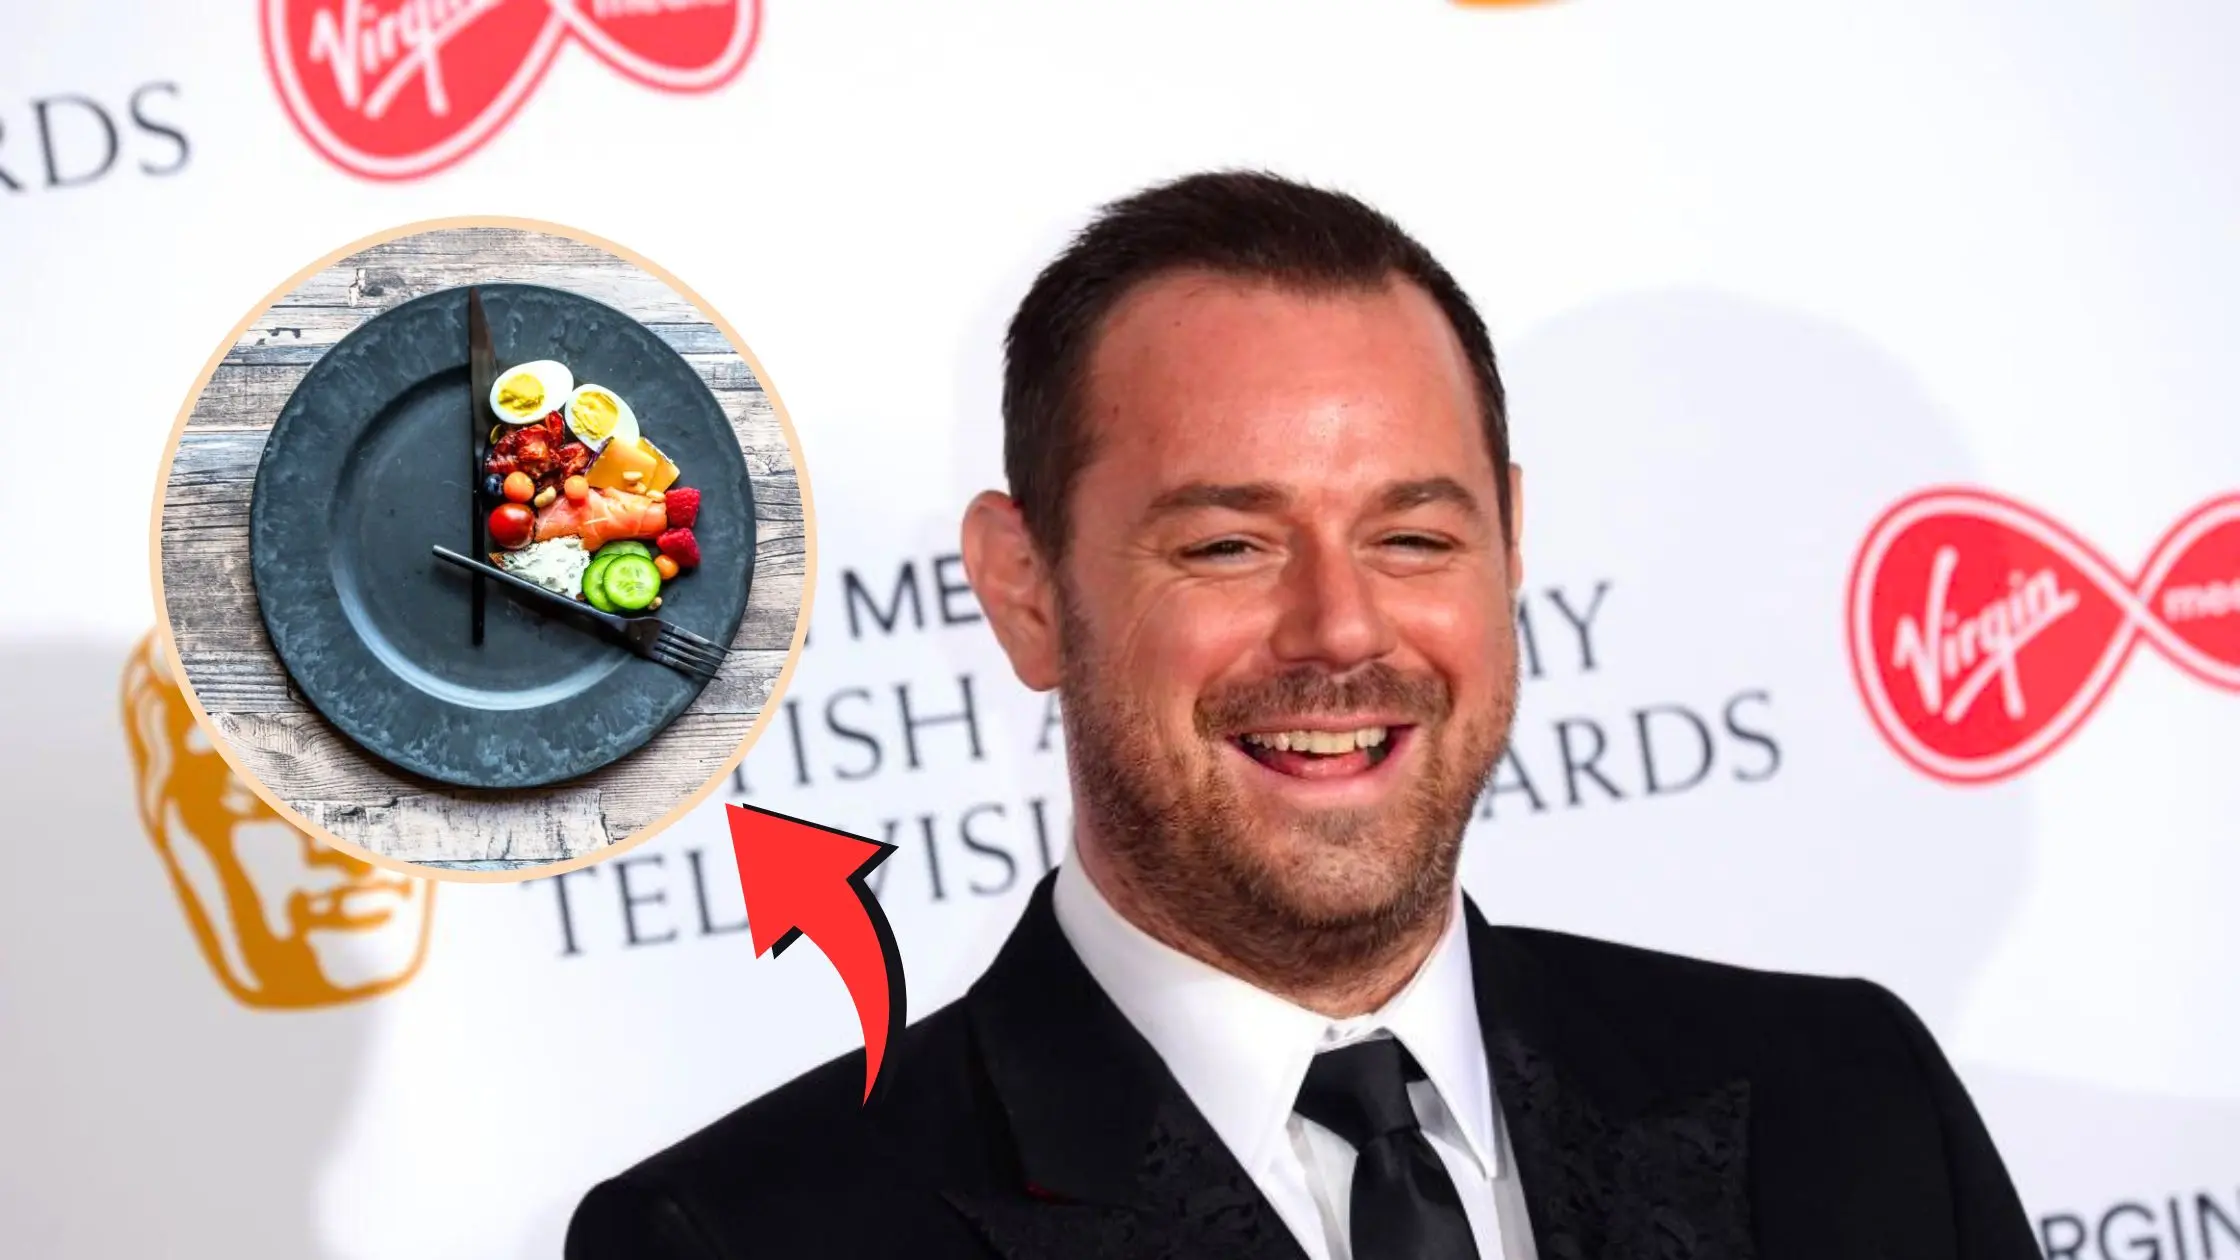 EastEnders' Danny Dyer Credits 16-Hour Fasting For His Weight Loss